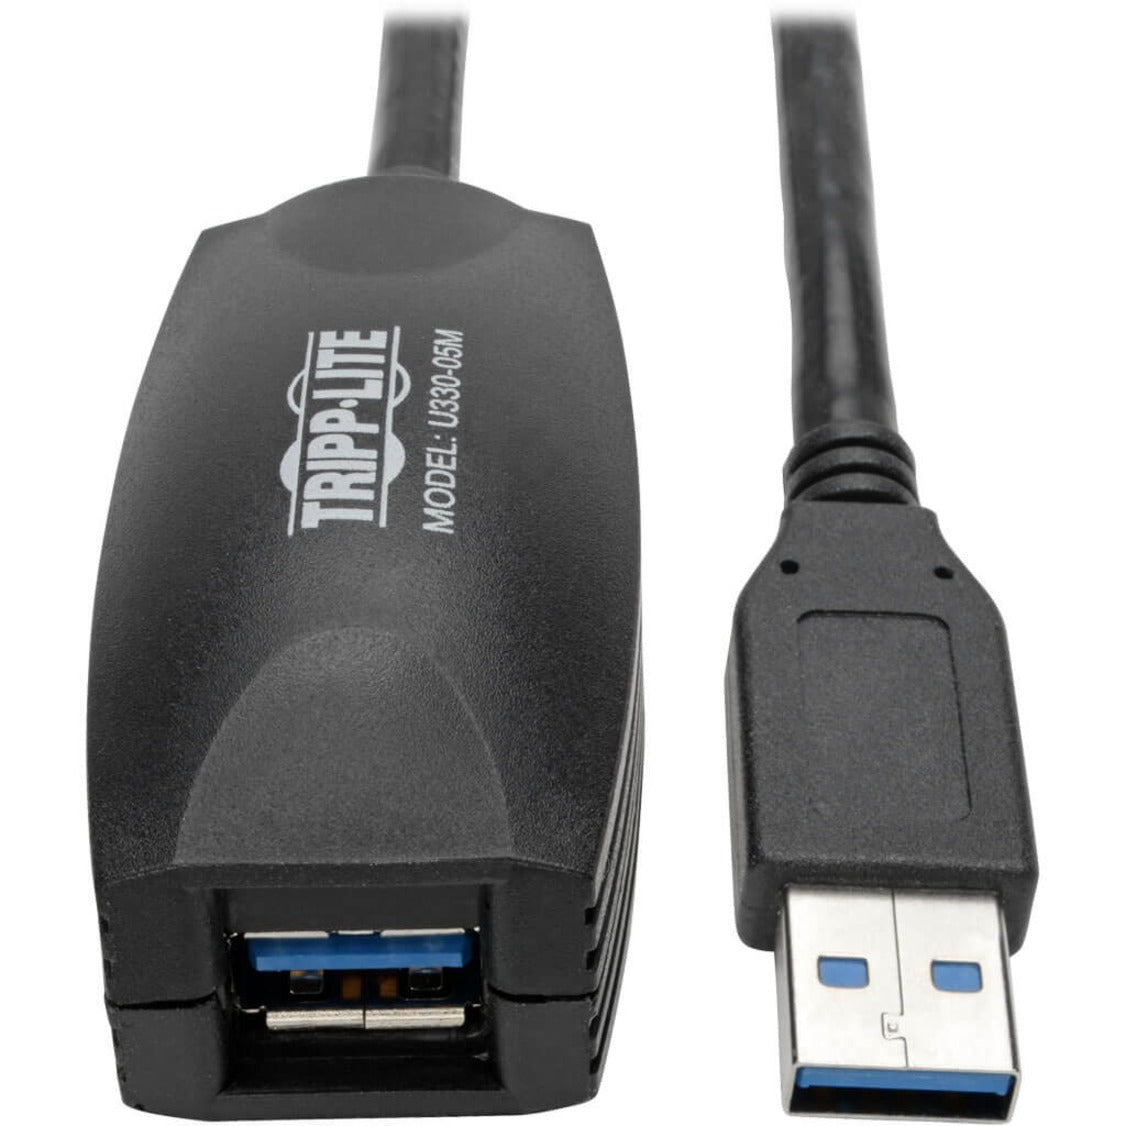 Tripp Lite U330-05M 5 meter USB3.0 Super Speed A/A Active Extension Cable, 16-ft, Gray